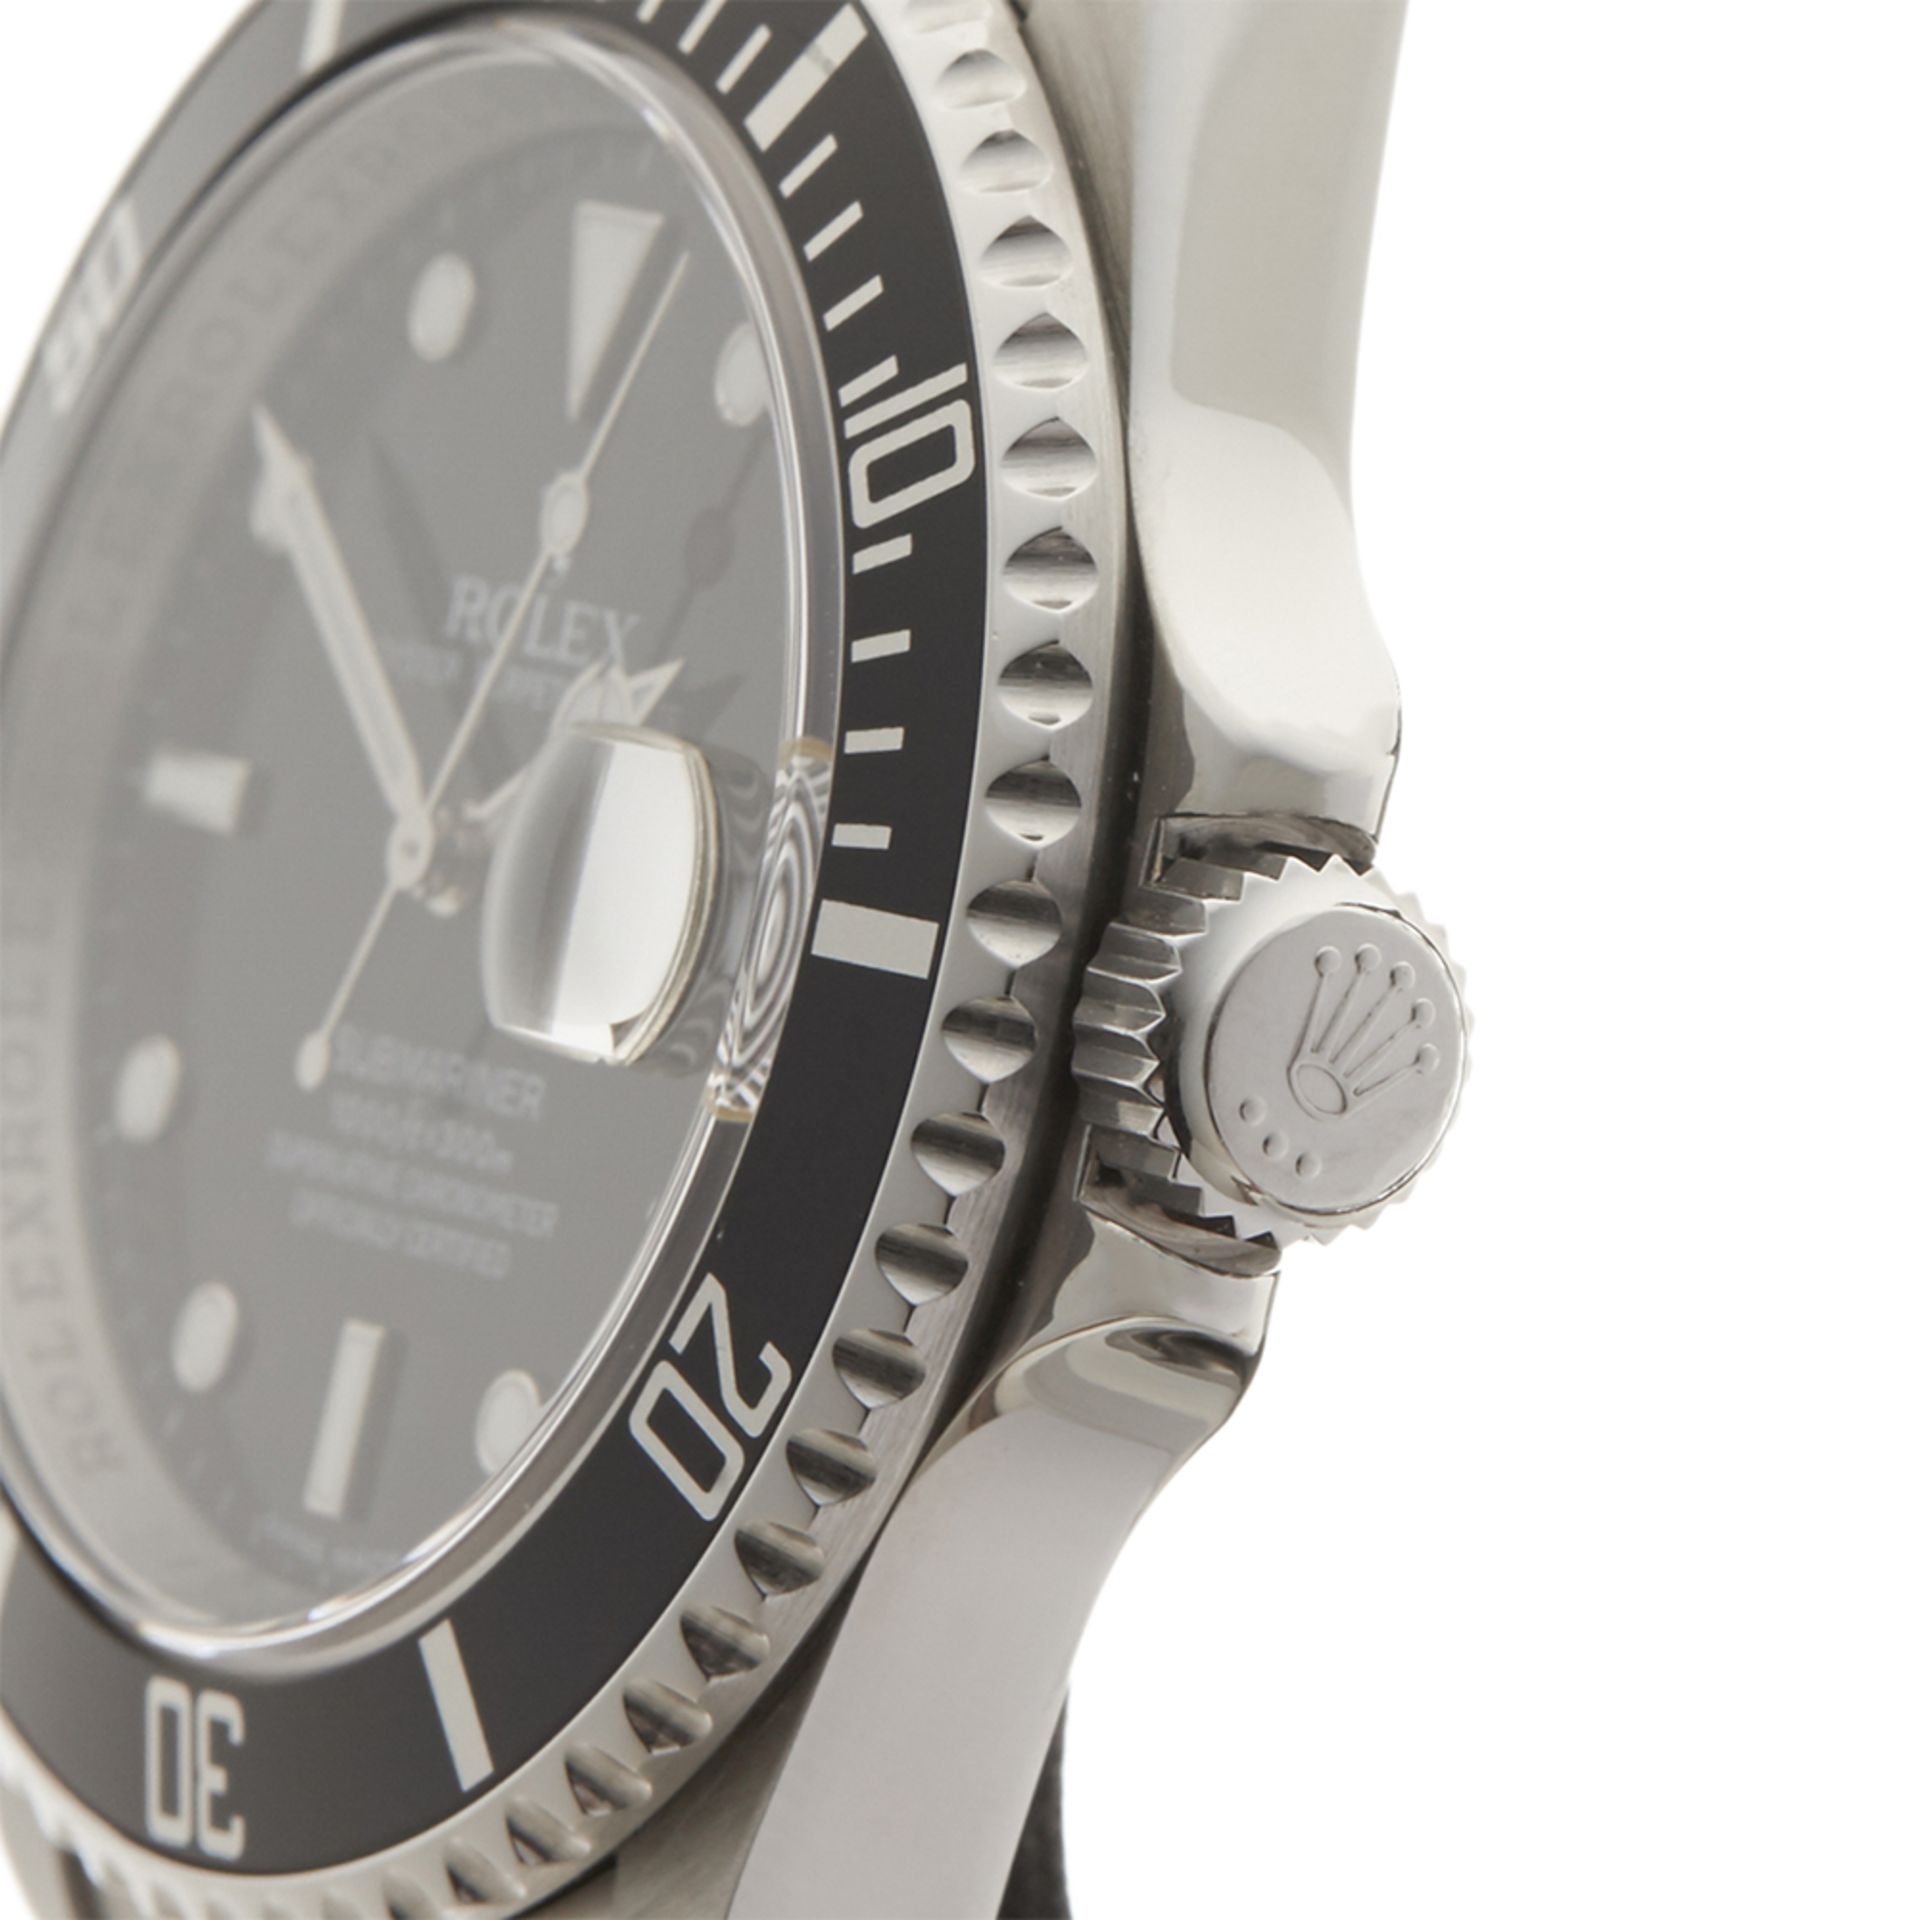 Rolex Submariner 40mm Stainless Steel - 16610 - Image 4 of 9